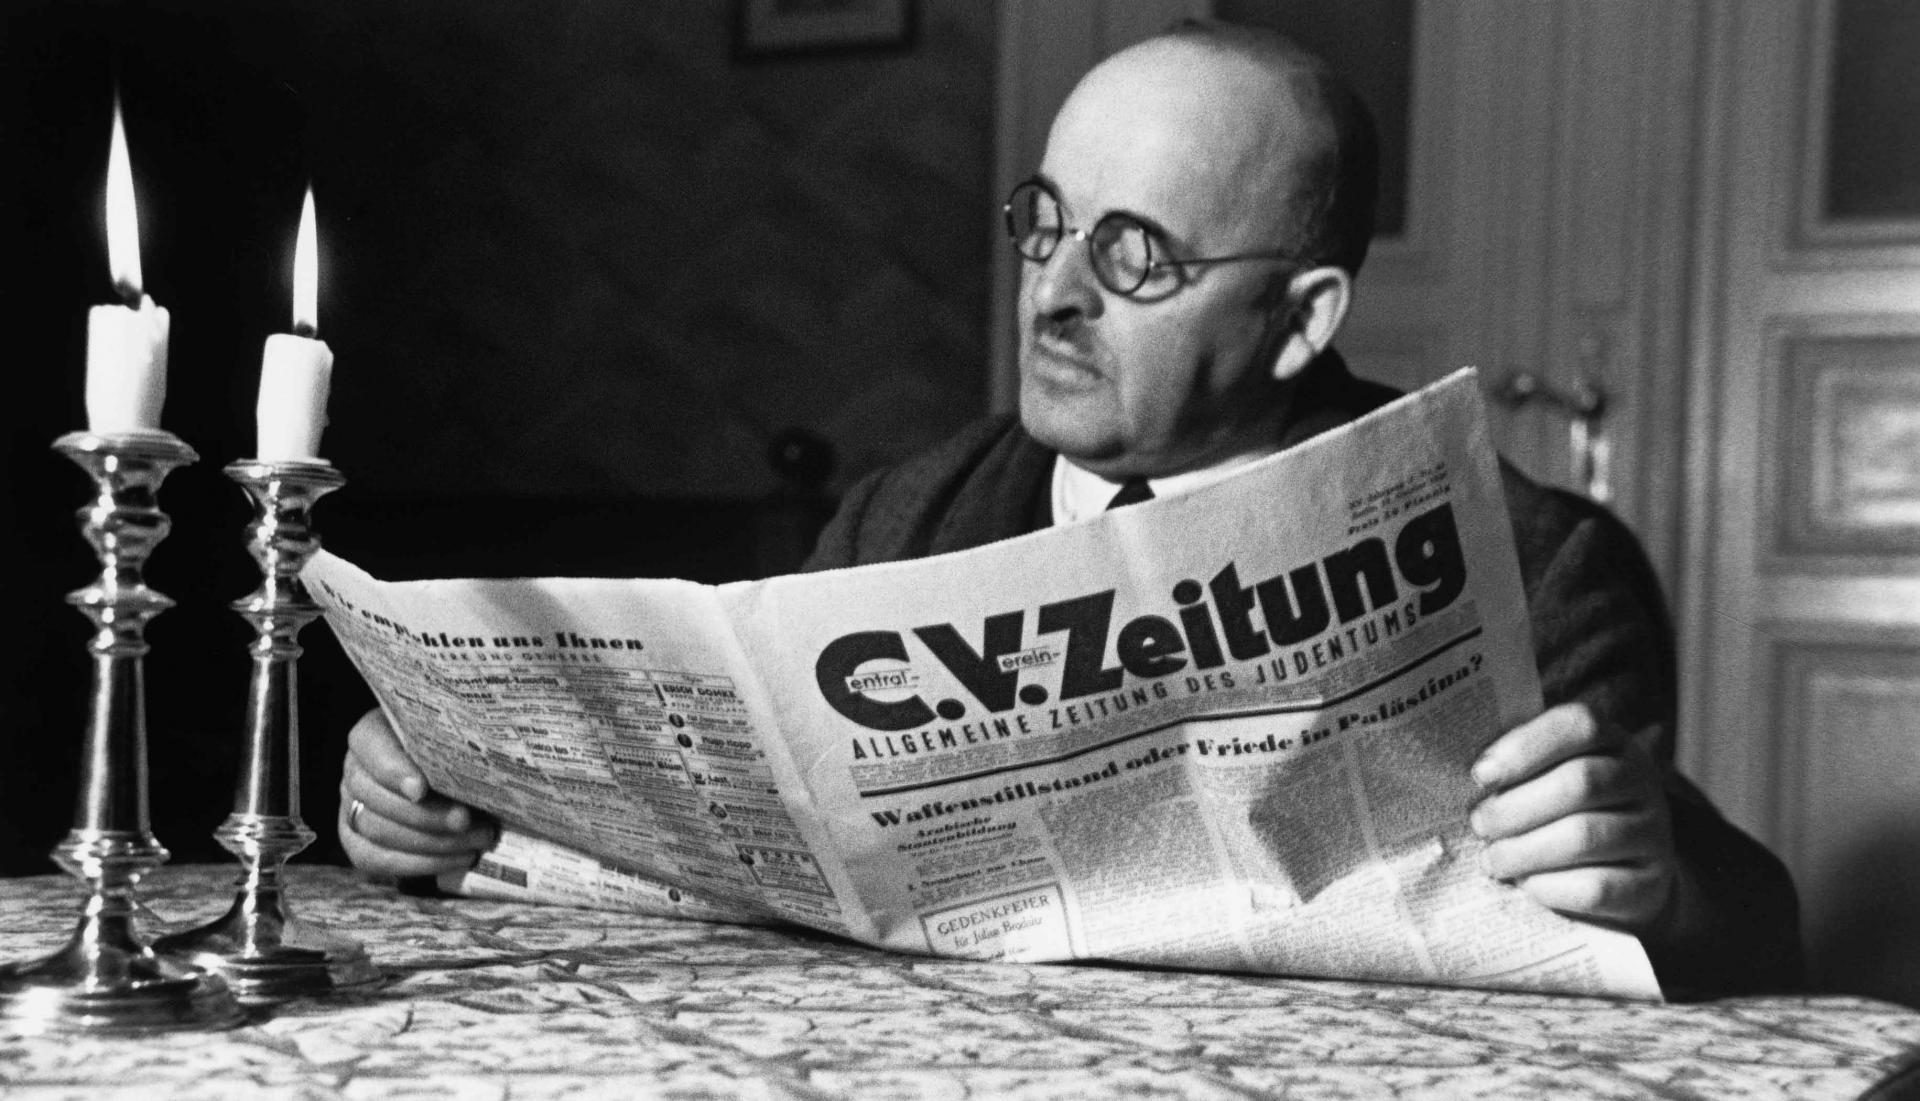 Black and white photo by Herbert Sonnenfeld: A man sitting at a table with two burning Shabbat candles and reading the C.V. newspaper